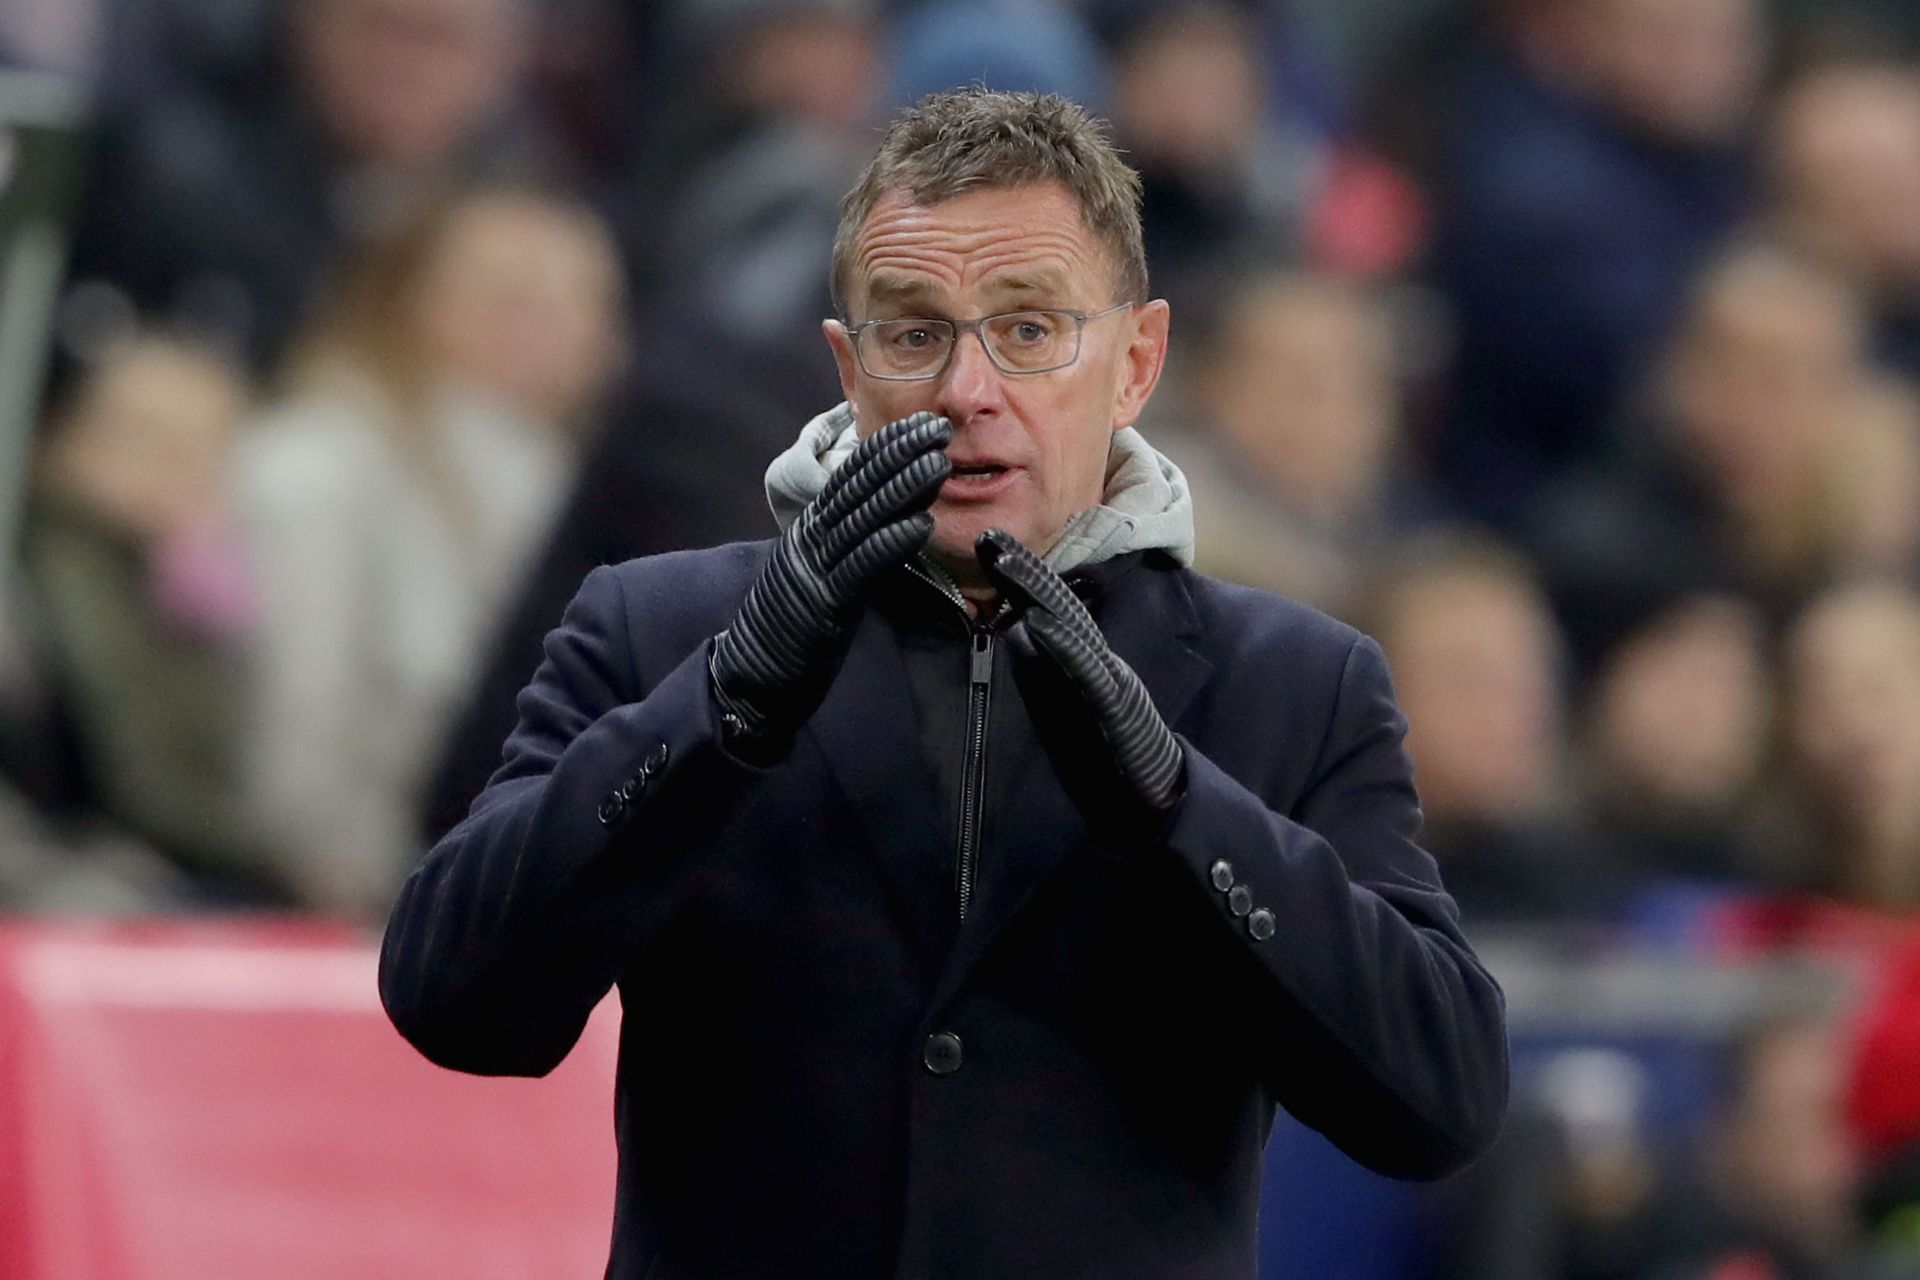 Manchester United manager Ralf Rangnick